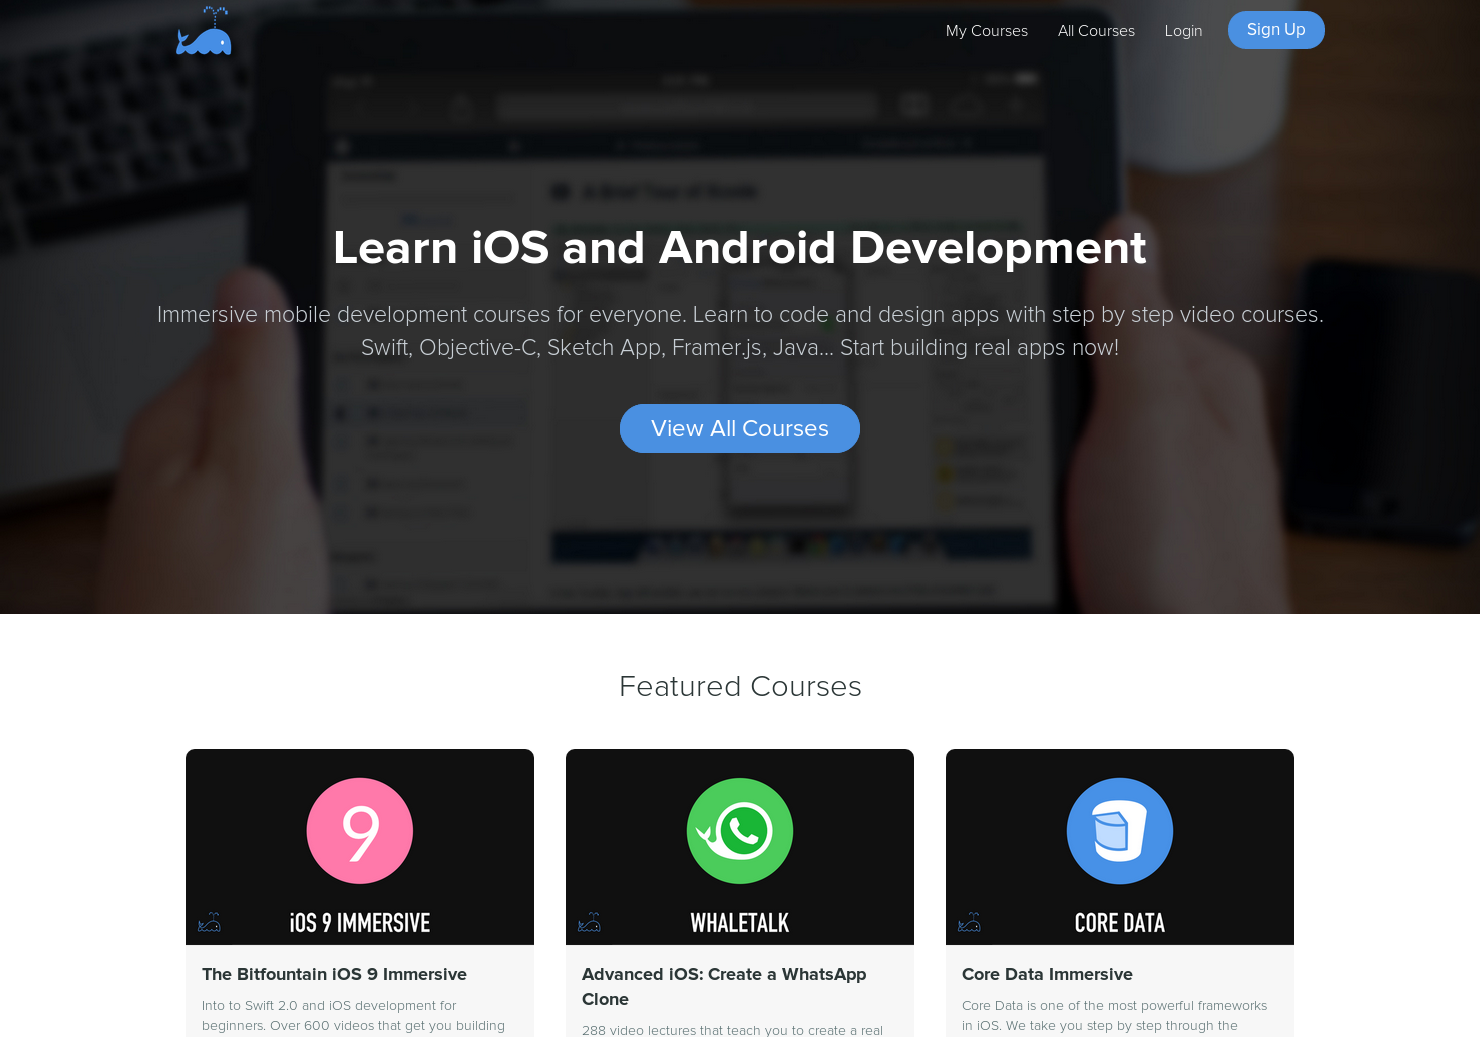 The Complete iOS7 Course